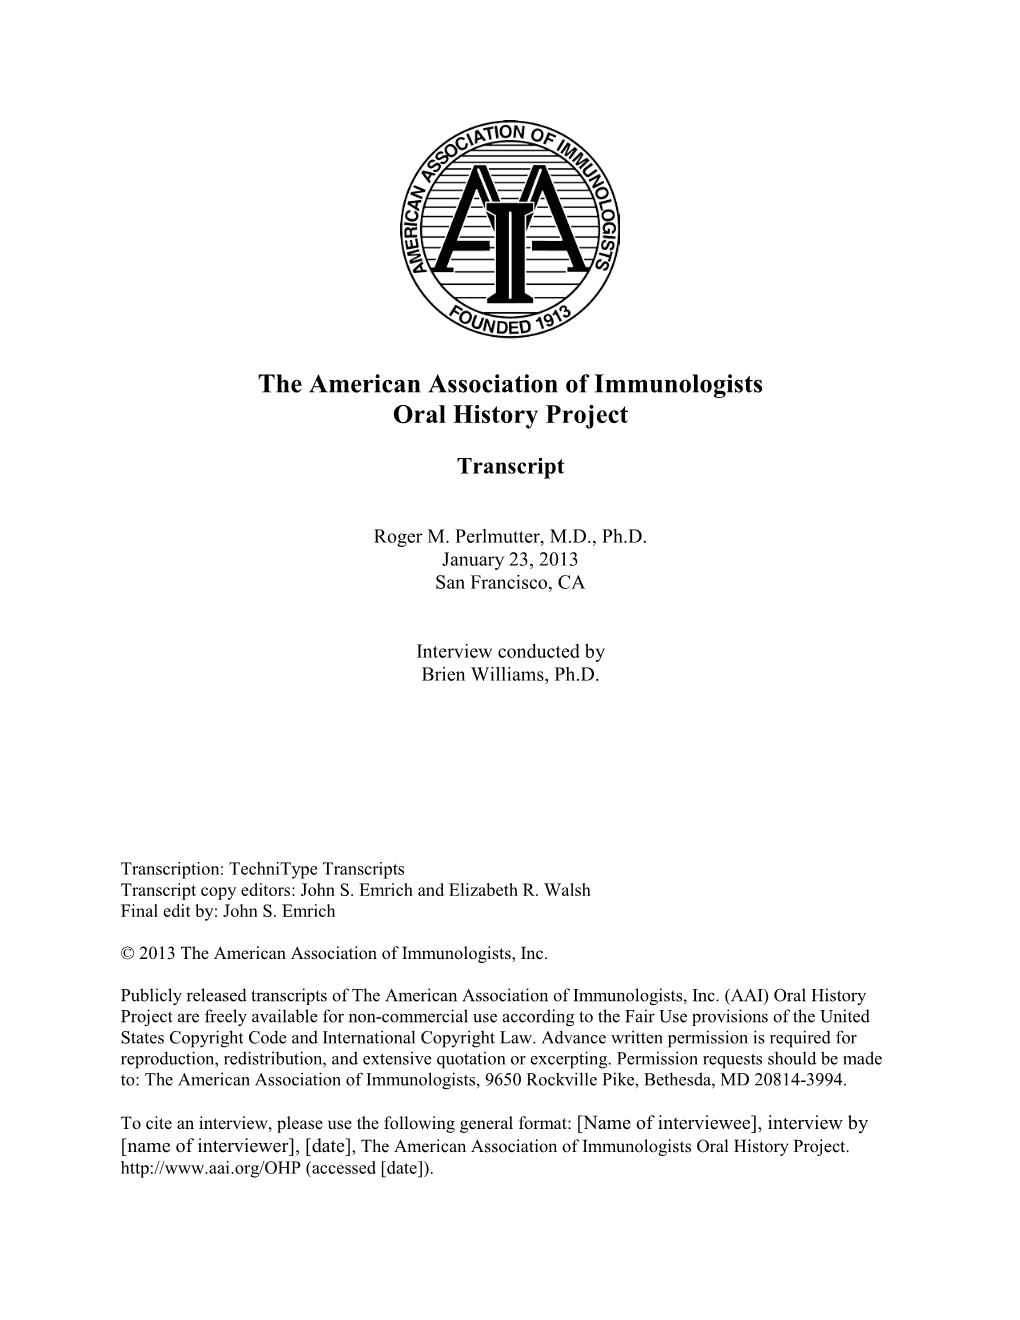 The American Association of Immunologists Oral History Project